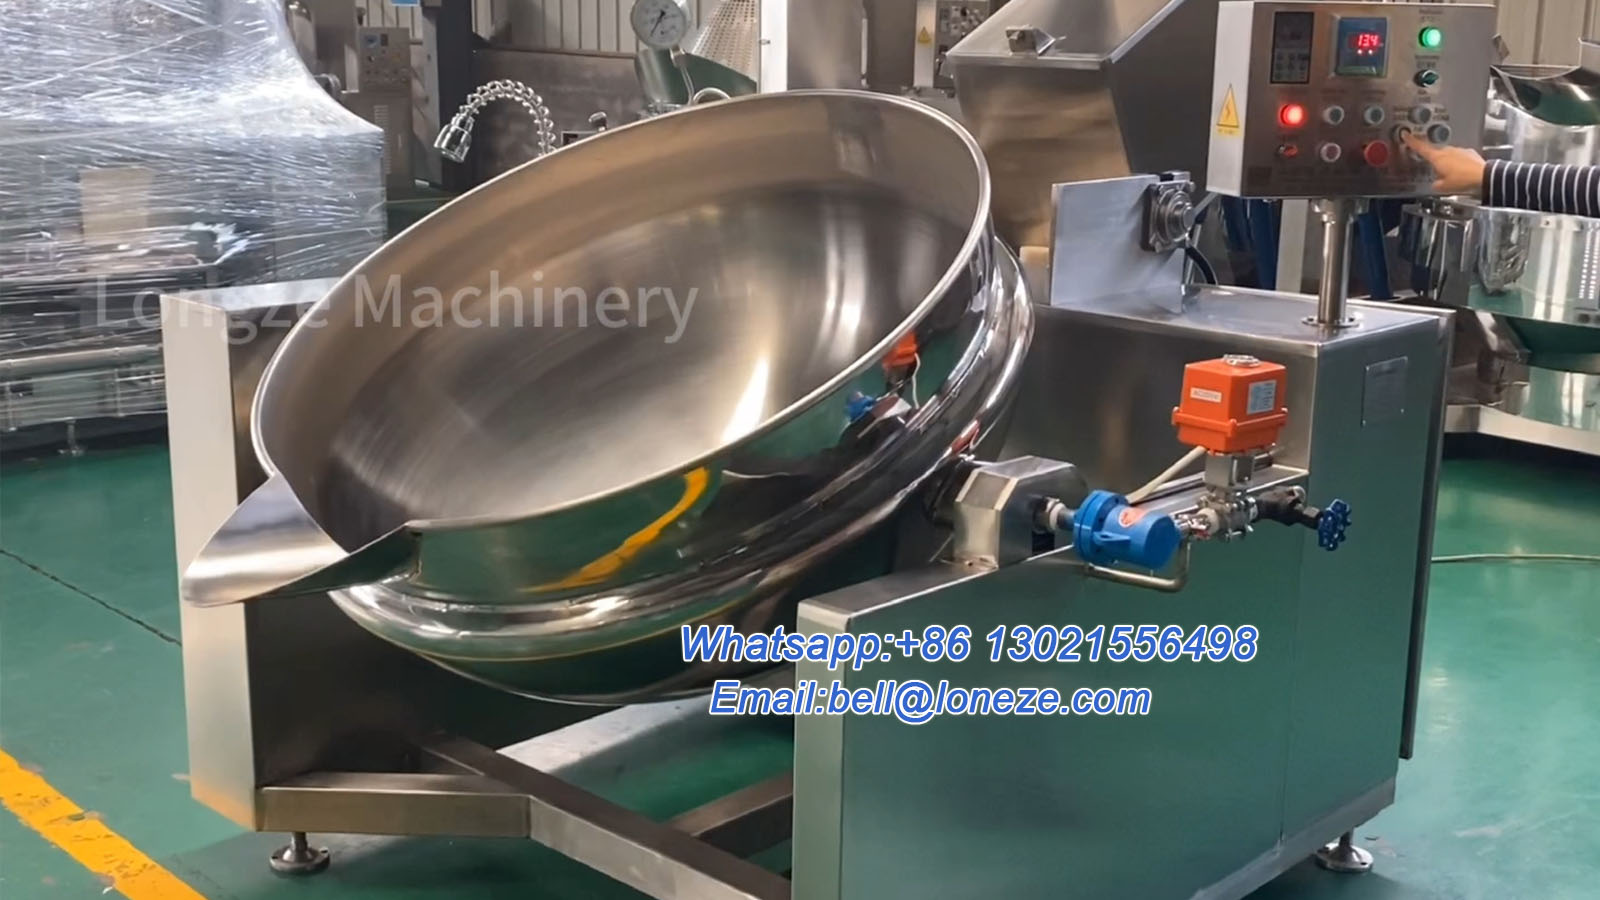 Stainless Steel Tilting Steam Cooking Pot with Mixer